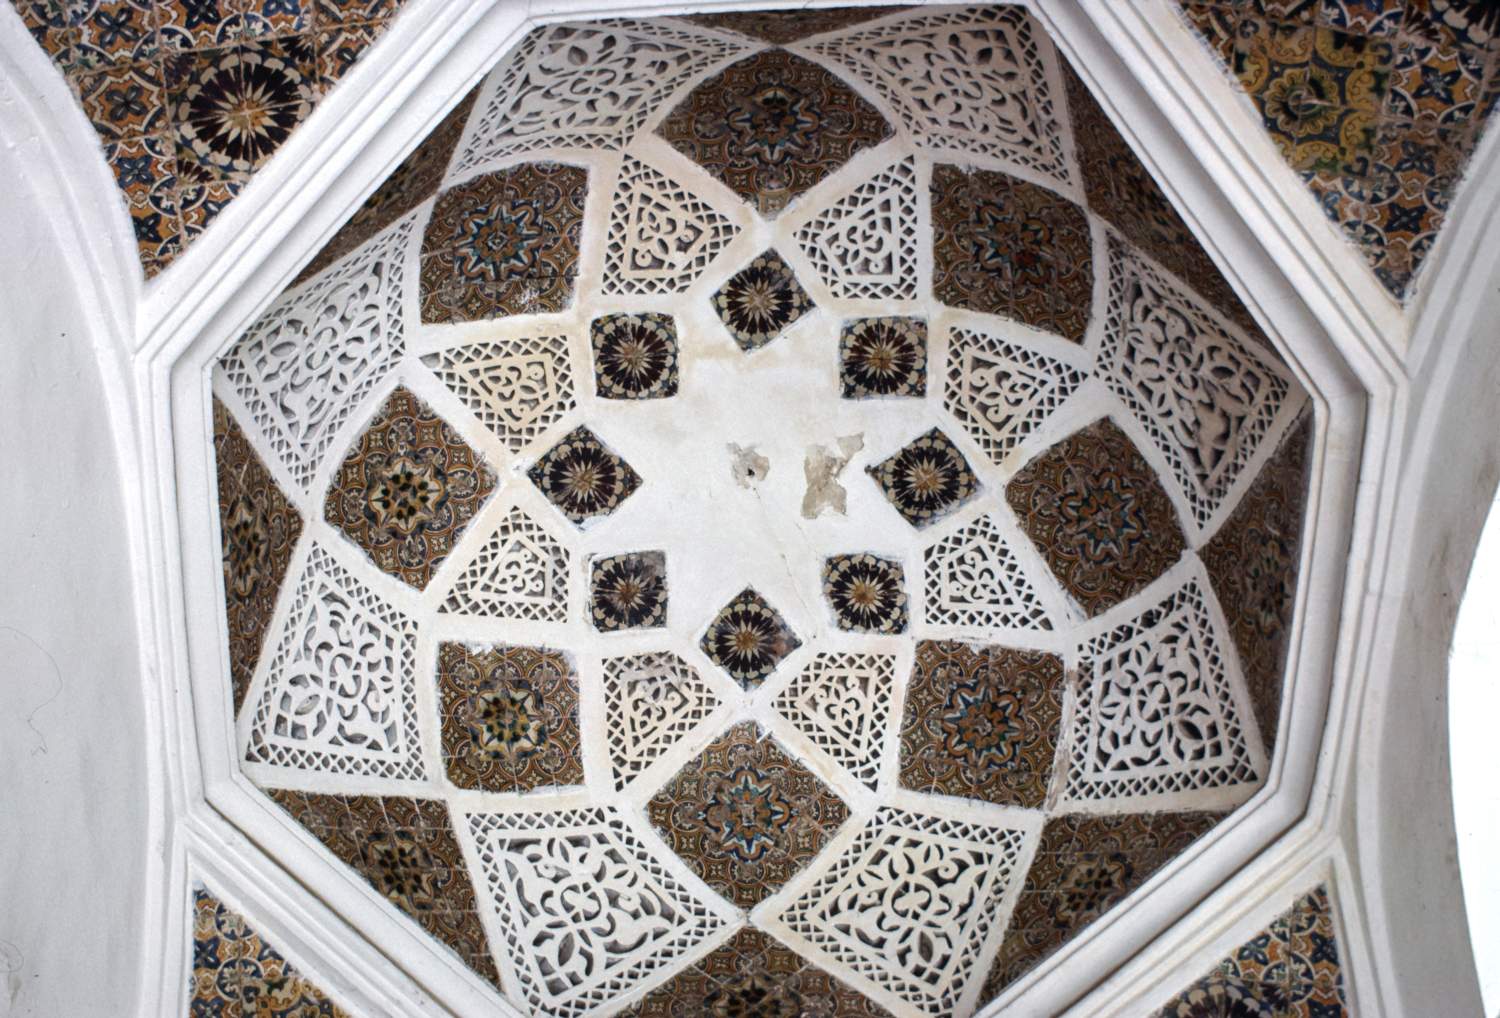 Upward view of the octagonal dome